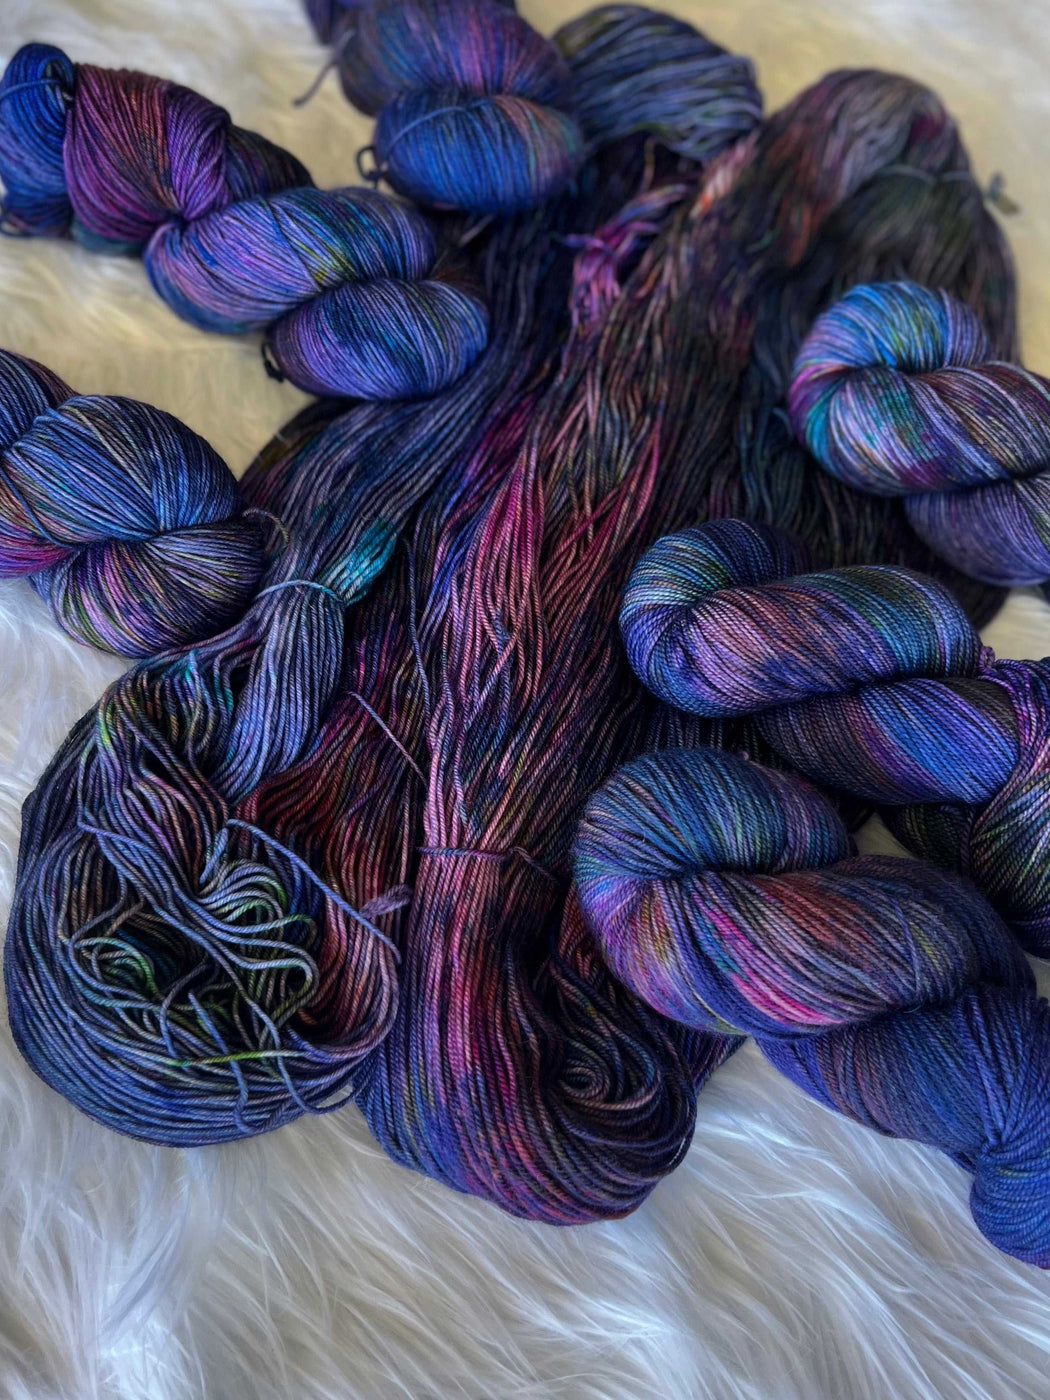 Stormy Shore Ruby and Roses Yarn